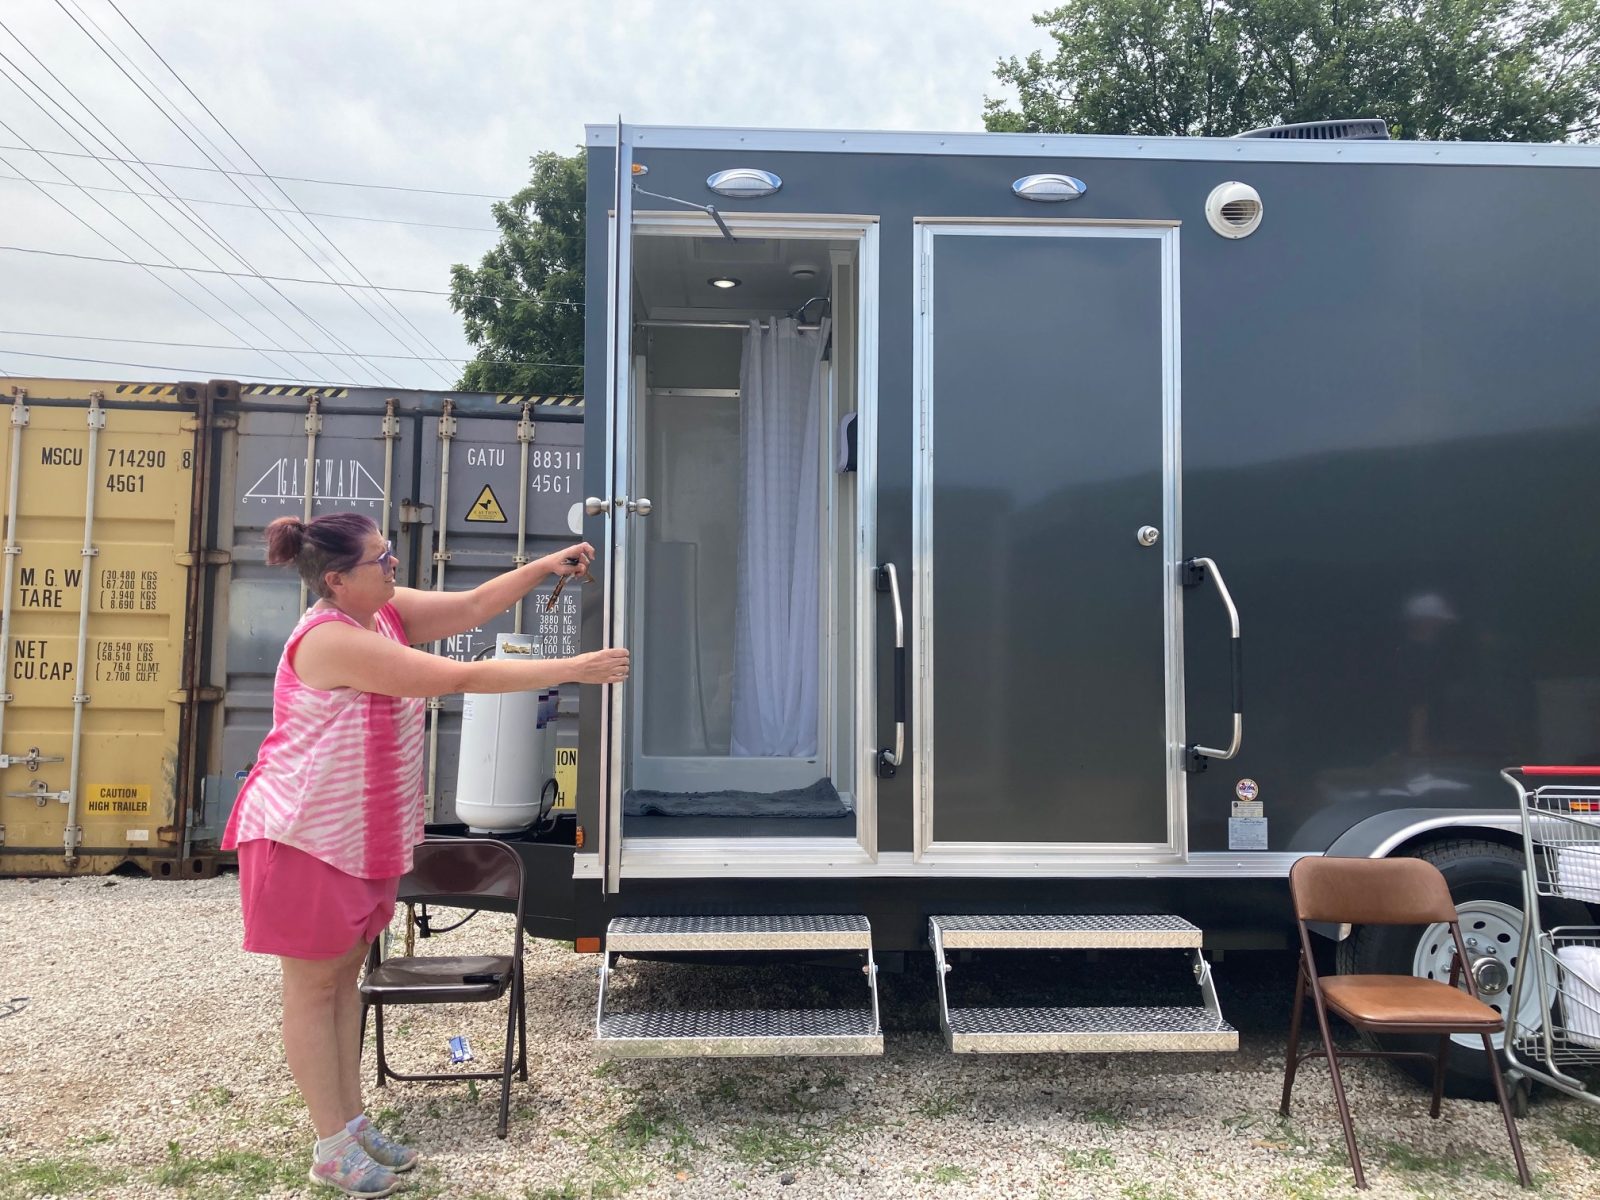 Dena Lantz, the director of the Connecting Grounds Outreach Center, hold open a door to one of three shower stalls on the new shower trailer.